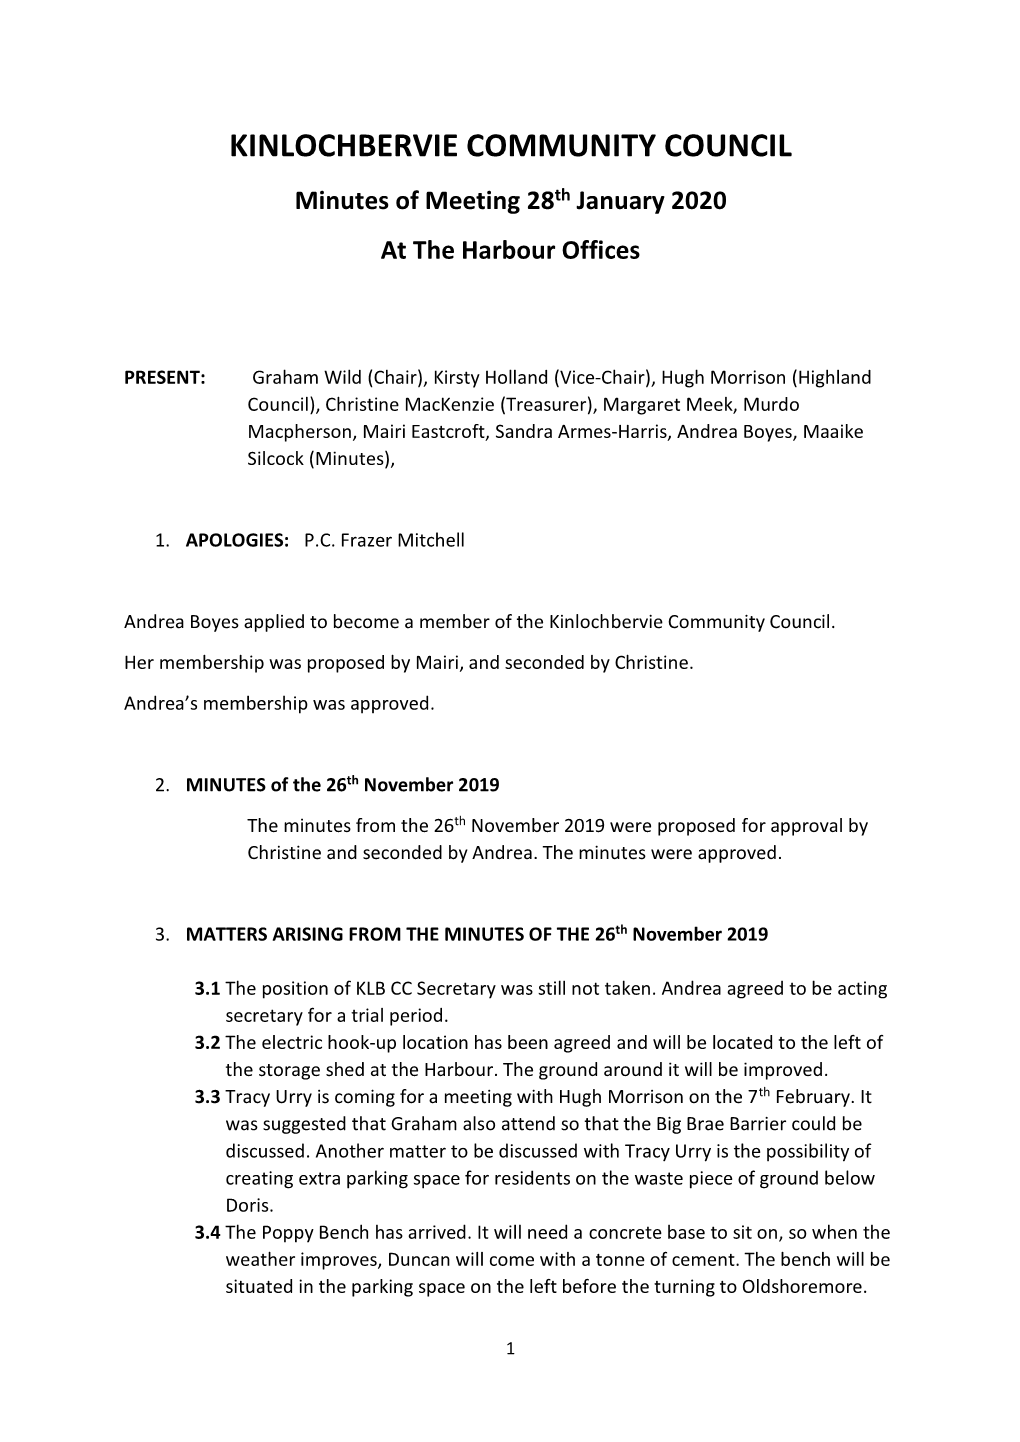 KINLOCHBERVIE COMMUNITY COUNCIL Minutes of Meeting 28Th January 2020 at the Harbour Offices